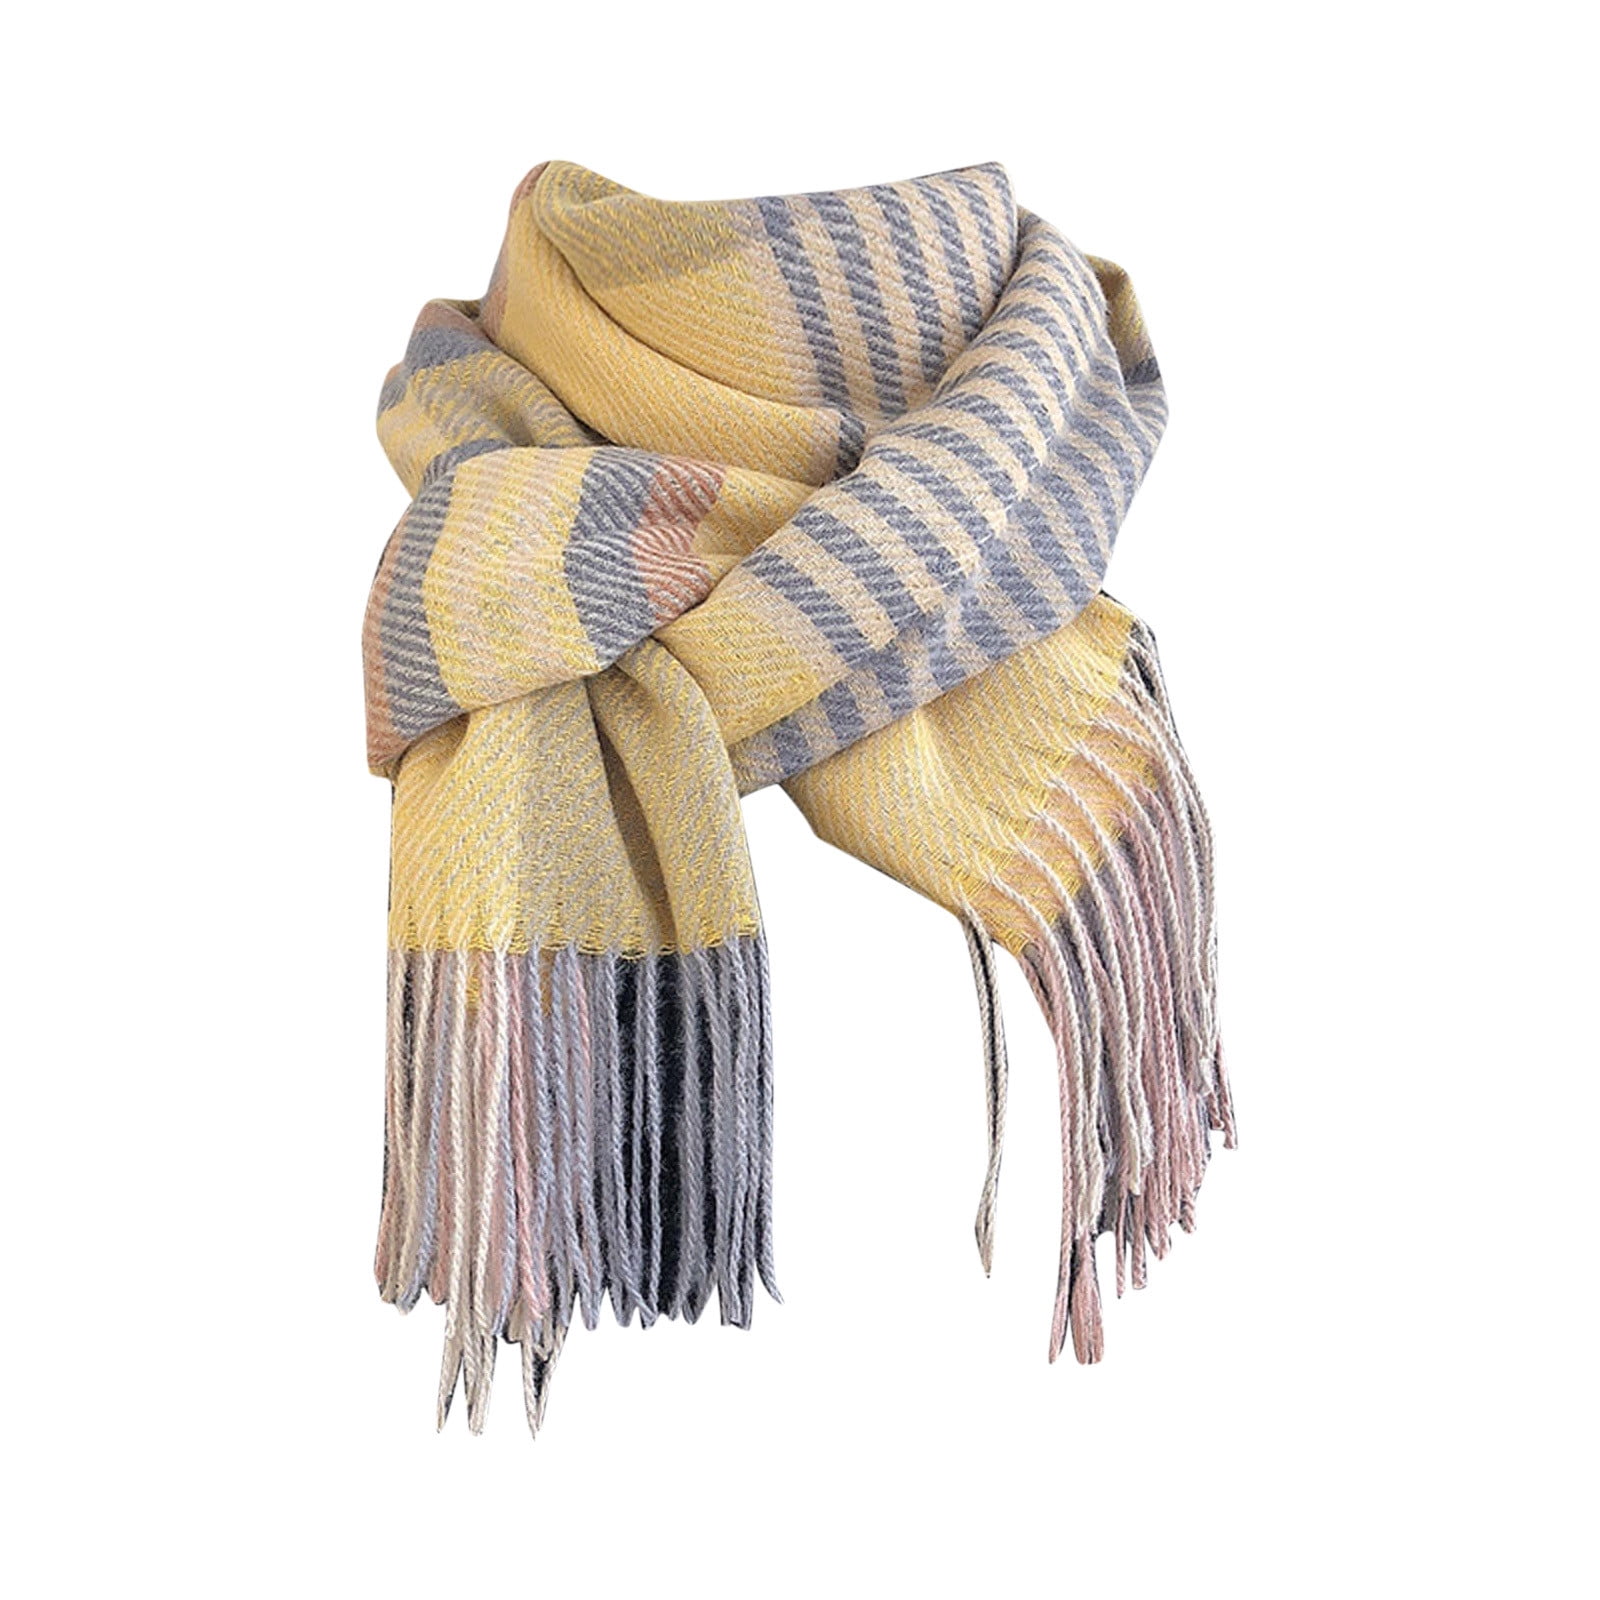 1pc Ladies' Checkered Scarf, Trendy Classic All-match Scarf In